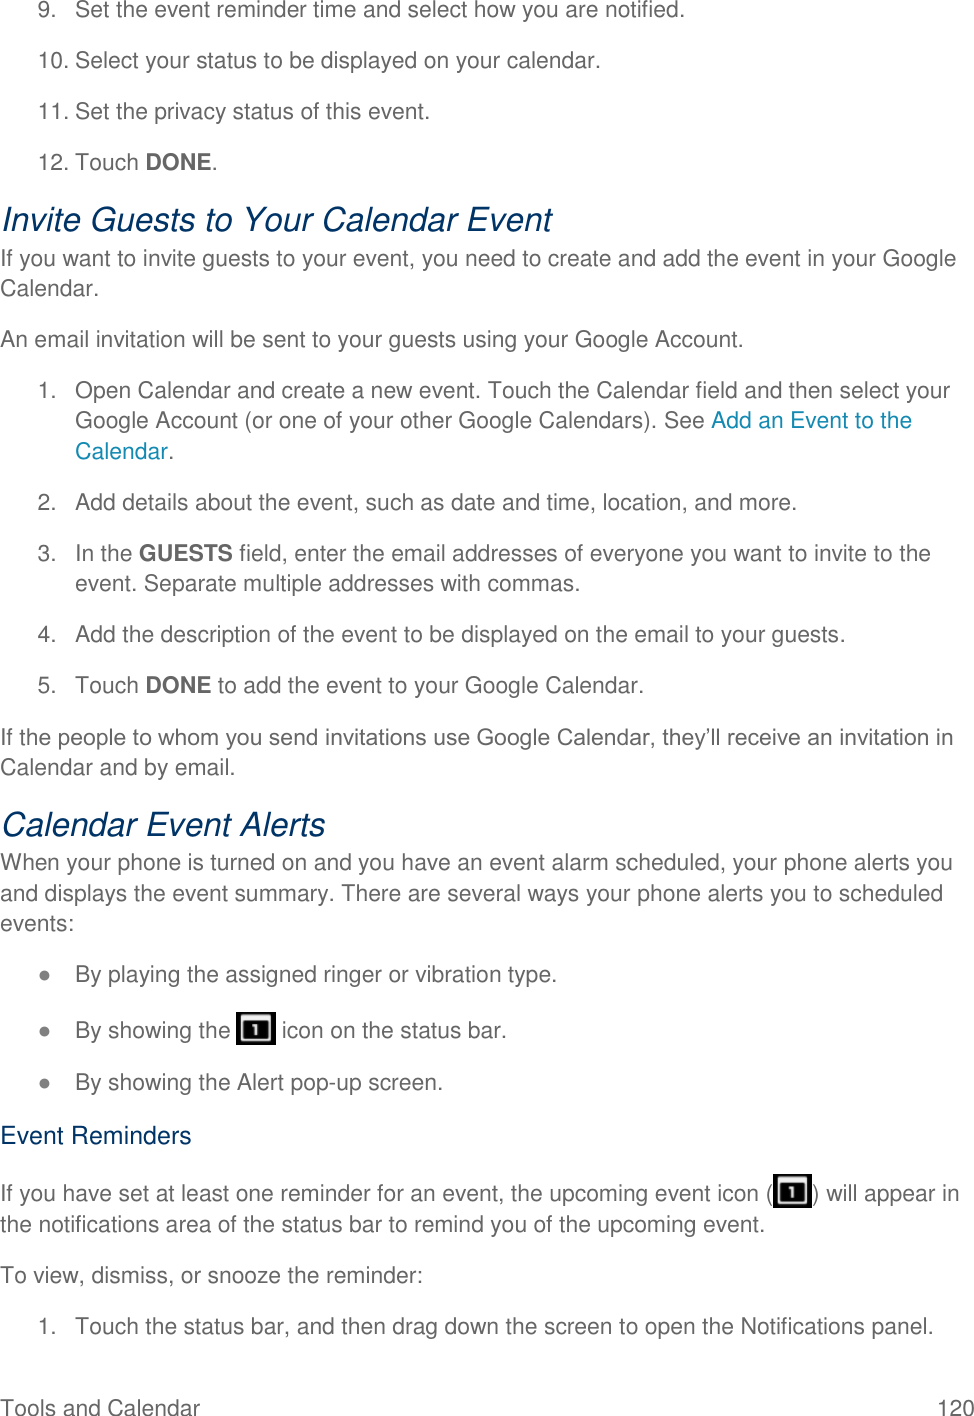 Tools and Calendar  120 9.  Set the event reminder time and select how you are notified. 10. Select your status to be displayed on your calendar. 11. Set the privacy status of this event. 12. Touch DONE. Invite Guests to Your Calendar Event  If you want to invite guests to your event, you need to create and add the event in your Google Calendar.  An email invitation will be sent to your guests using your Google Account. 1.  Open Calendar and create a new event. Touch the Calendar field and then select your Google Account (or one of your other Google Calendars). See Add an Event to the Calendar. 2.  Add details about the event, such as date and time, location, and more. 3.  In the GUESTS field, enter the email addresses of everyone you want to invite to the event. Separate multiple addresses with commas. 4.  Add the description of the event to be displayed on the email to your guests. 5.  Touch DONE to add the event to your Google Calendar. If the people to whom you send invitations use Google Calendar, they’ll receive an invitation in Calendar and by email. Calendar Event Alerts When your phone is turned on and you have an event alarm scheduled, your phone alerts you and displays the event summary. There are several ways your phone alerts you to scheduled events: ● By playing the assigned ringer or vibration type. ● By showing the   icon on the status bar. ● By showing the Alert pop-up screen. Event Reminders If you have set at least one reminder for an event, the upcoming event icon ( ) will appear in the notifications area of the status bar to remind you of the upcoming event. To view, dismiss, or snooze the reminder: 1.  Touch the status bar, and then drag down the screen to open the Notifications panel. 